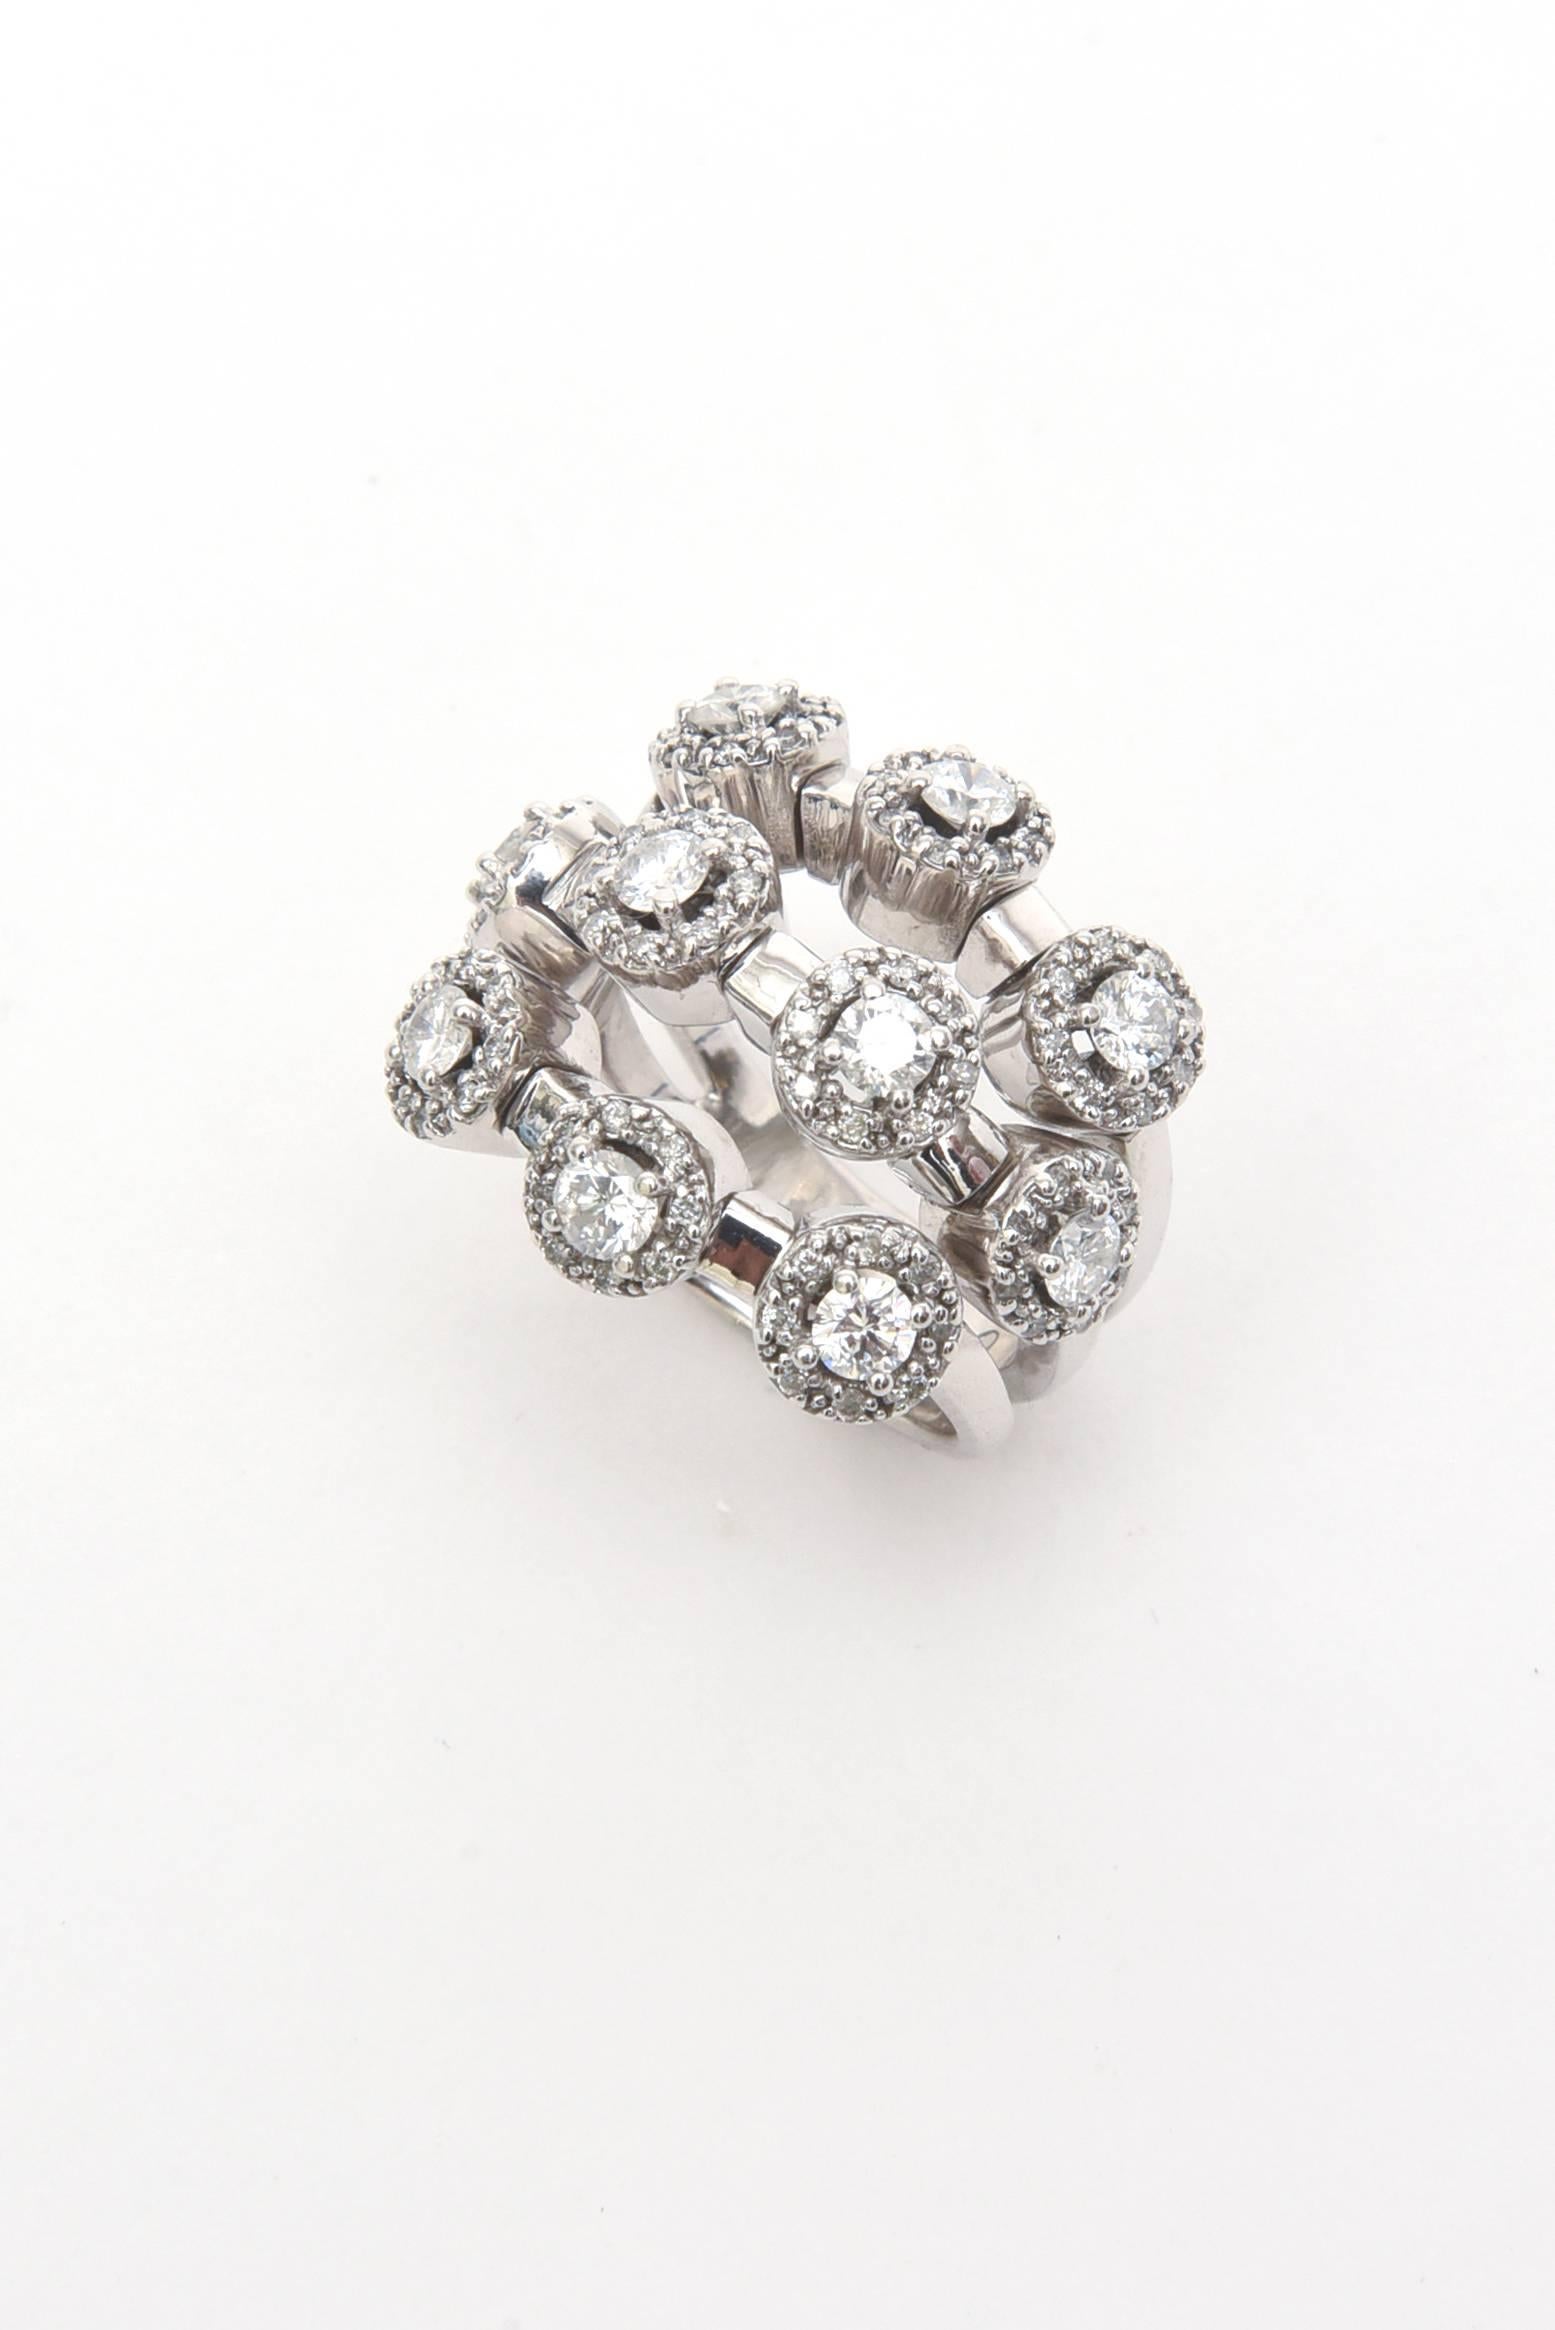 This arresting and stunning 14 Karat white gold diamond trembler ring has 3 connected rows consisting of 80 smaller diamonds of .40 in carat weight which are GH color. The 10 bigger diamonds that surround are 12 points each which equals 1.20 carat